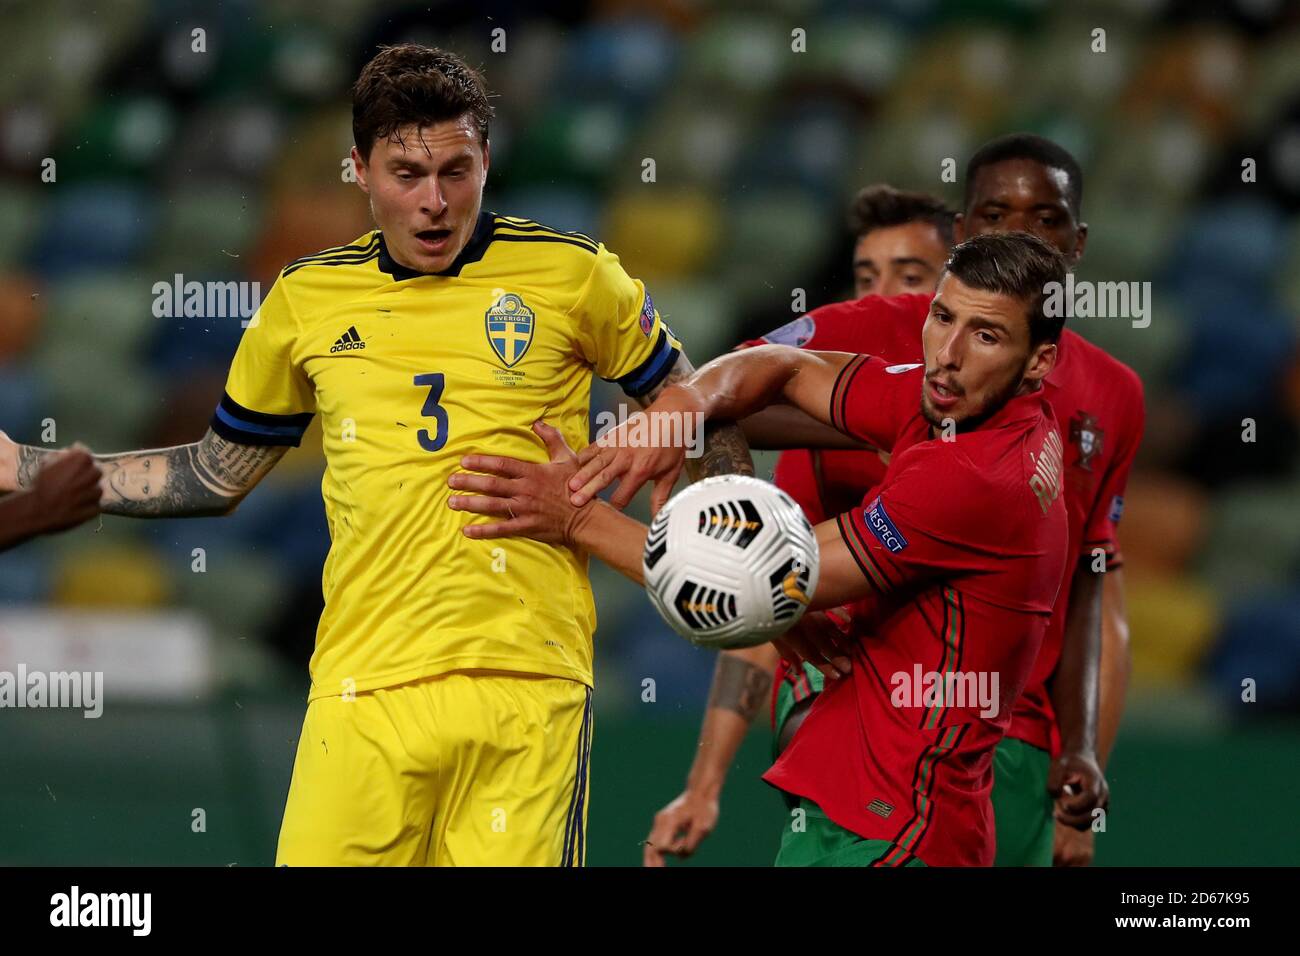 Lisbon, Portugal. 14th Oct, 2020. Ruben Dias (R) of Portugal defends Victor Lindelof of Sweden during their UEFA Nations League football match in Lisbon, Portugal, on Oct. 14, 2020. Credit: Pedro Fiuza/Xinhua/Alamy Live News Stock Photo